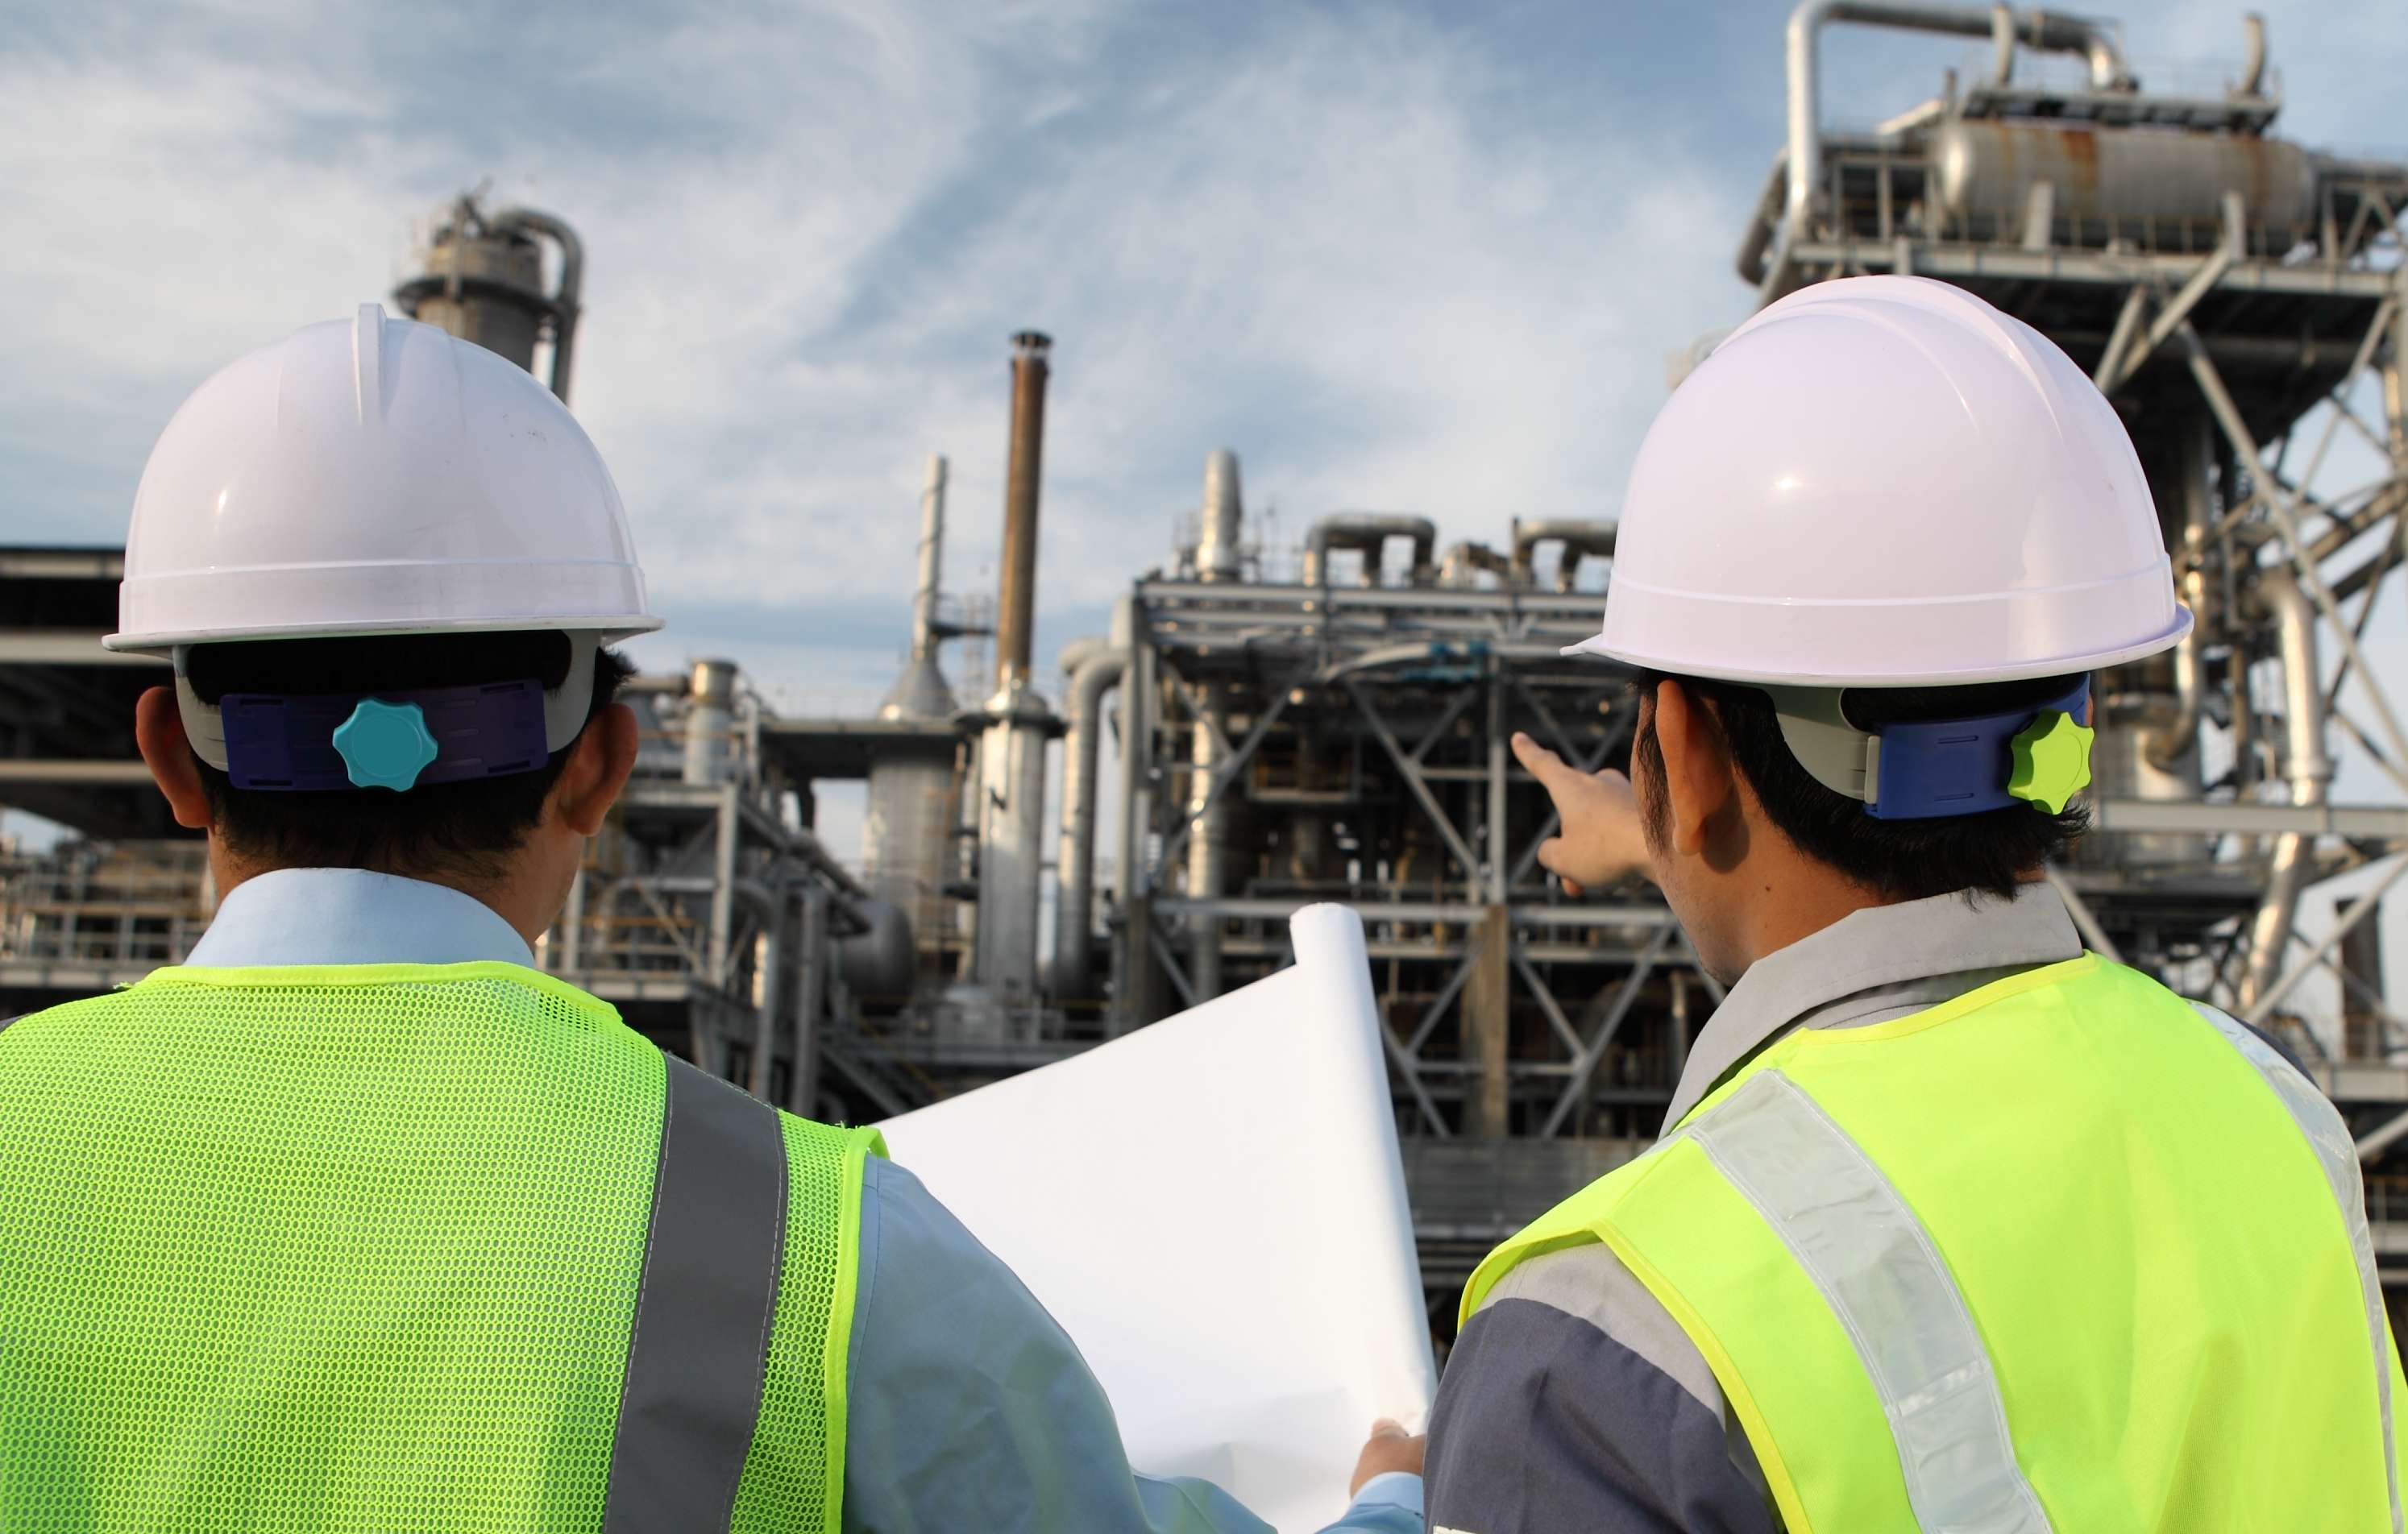 two-engineer-oil-industry-discussing-with-a-large-oil-refinery-background-rosen-group.jpg